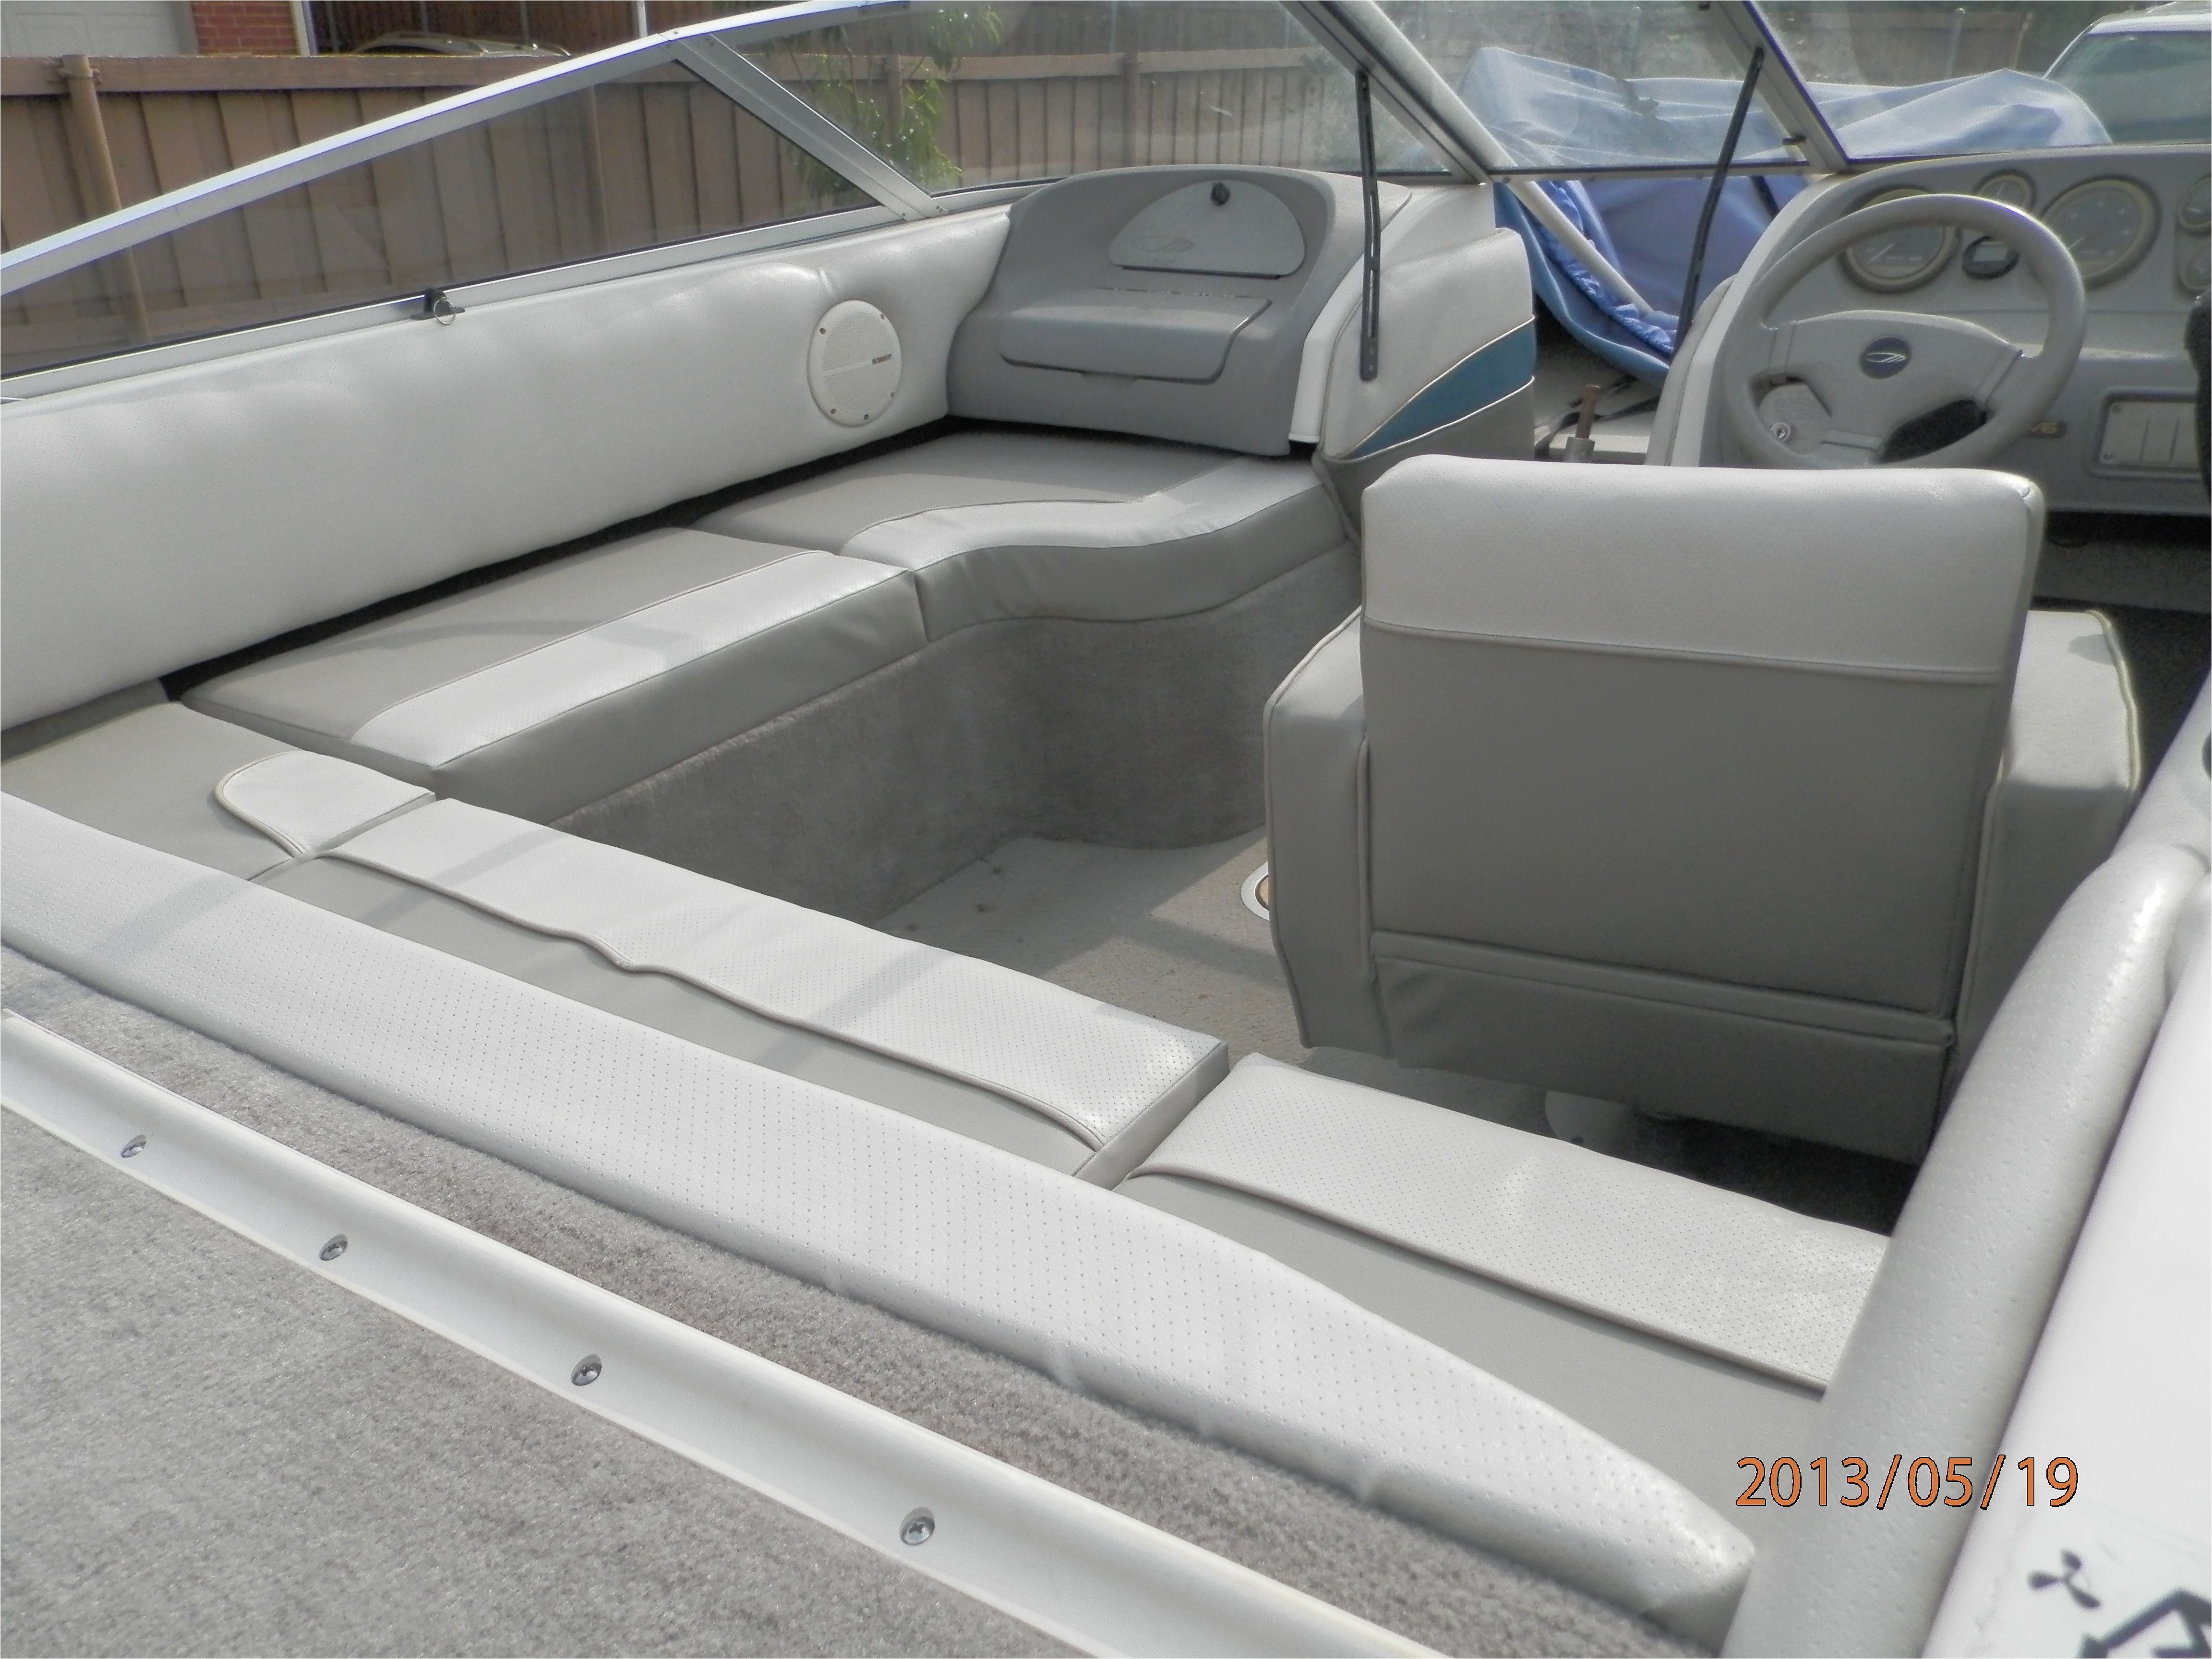 Diy Boat Interior Repair Redesigned the Old 1995 Boat From 2 Seats and A Bench to Wrap Around